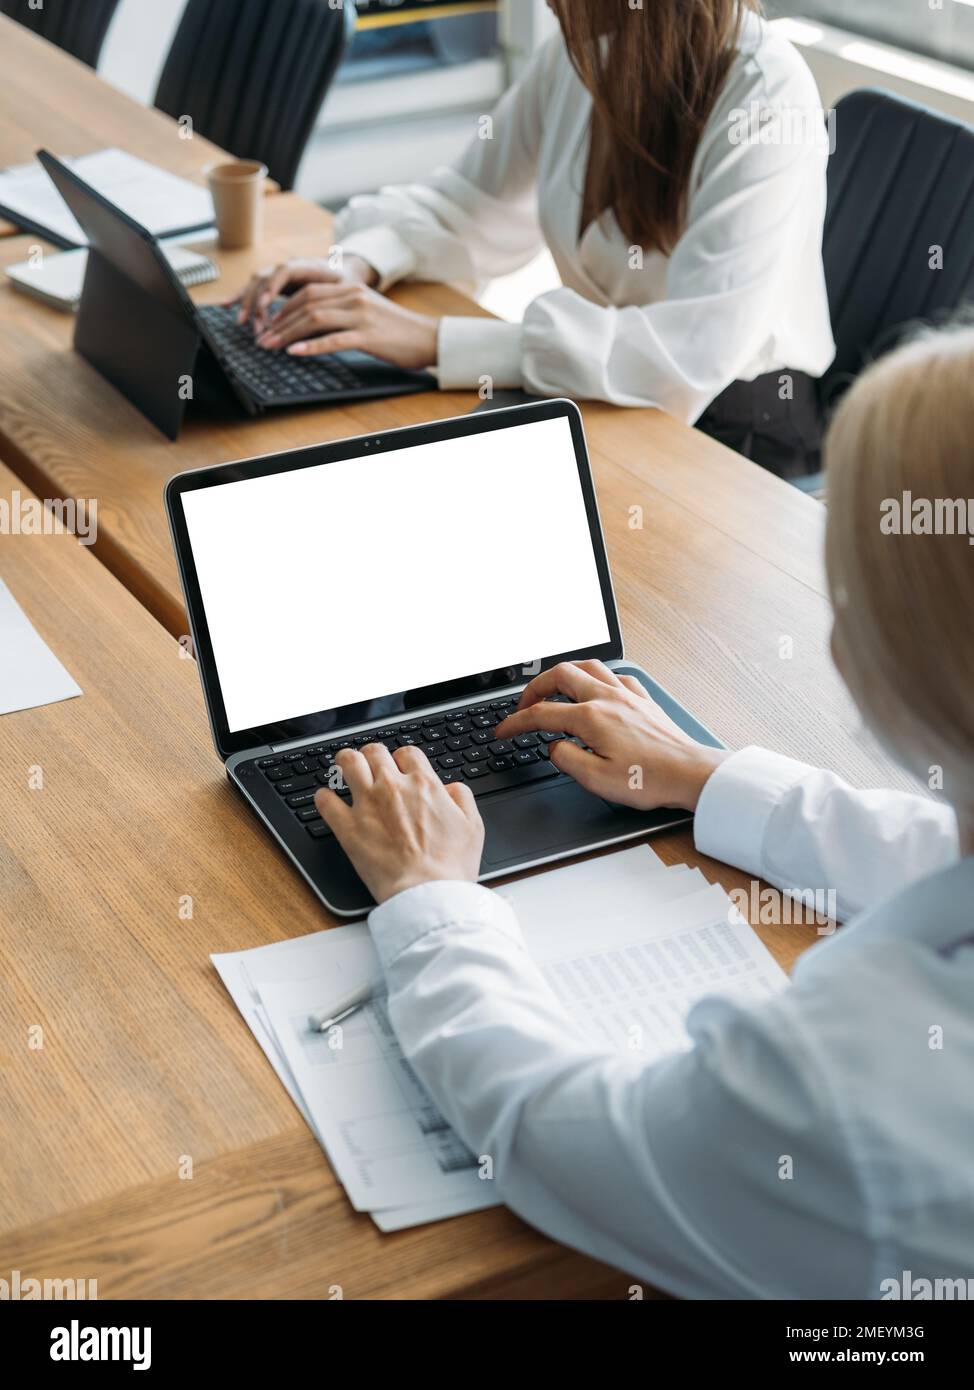 business meeting office work computer mockup Stock Photo